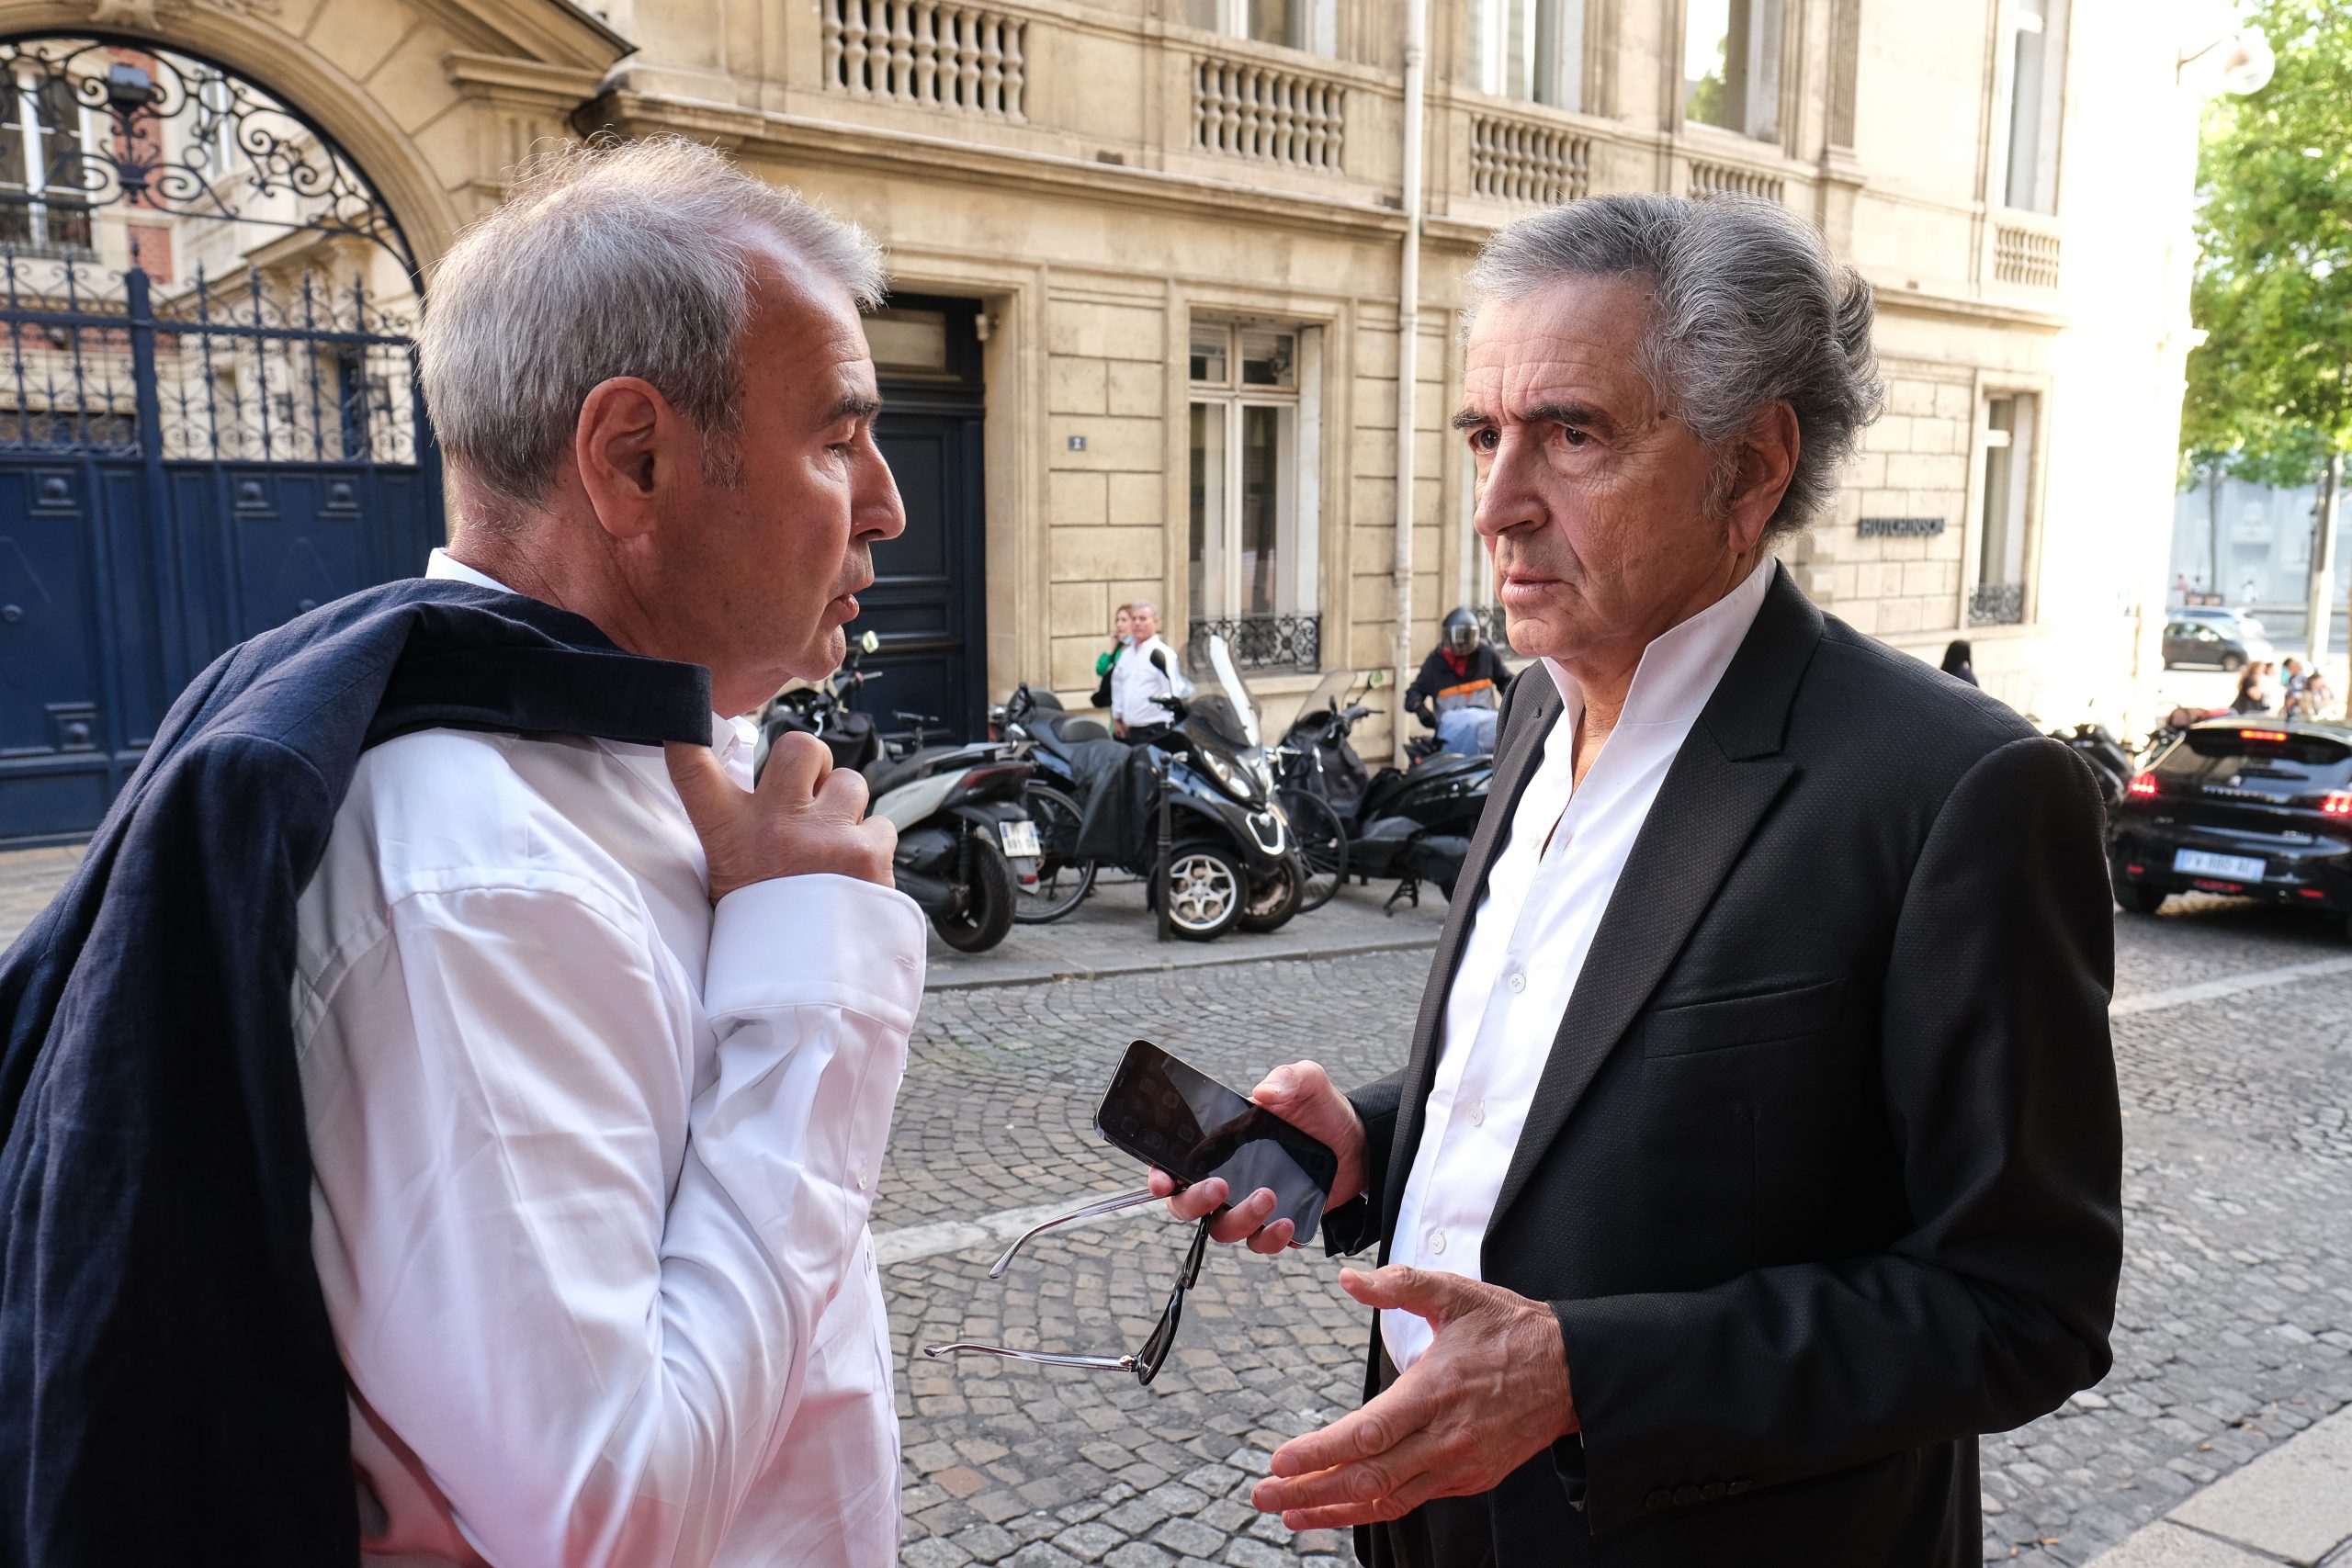 Marc Roussel and Bernard-Henri Lévy in front of the Cinema Le Balzac in Paris, before the screening of their film: "Why Ukraine".